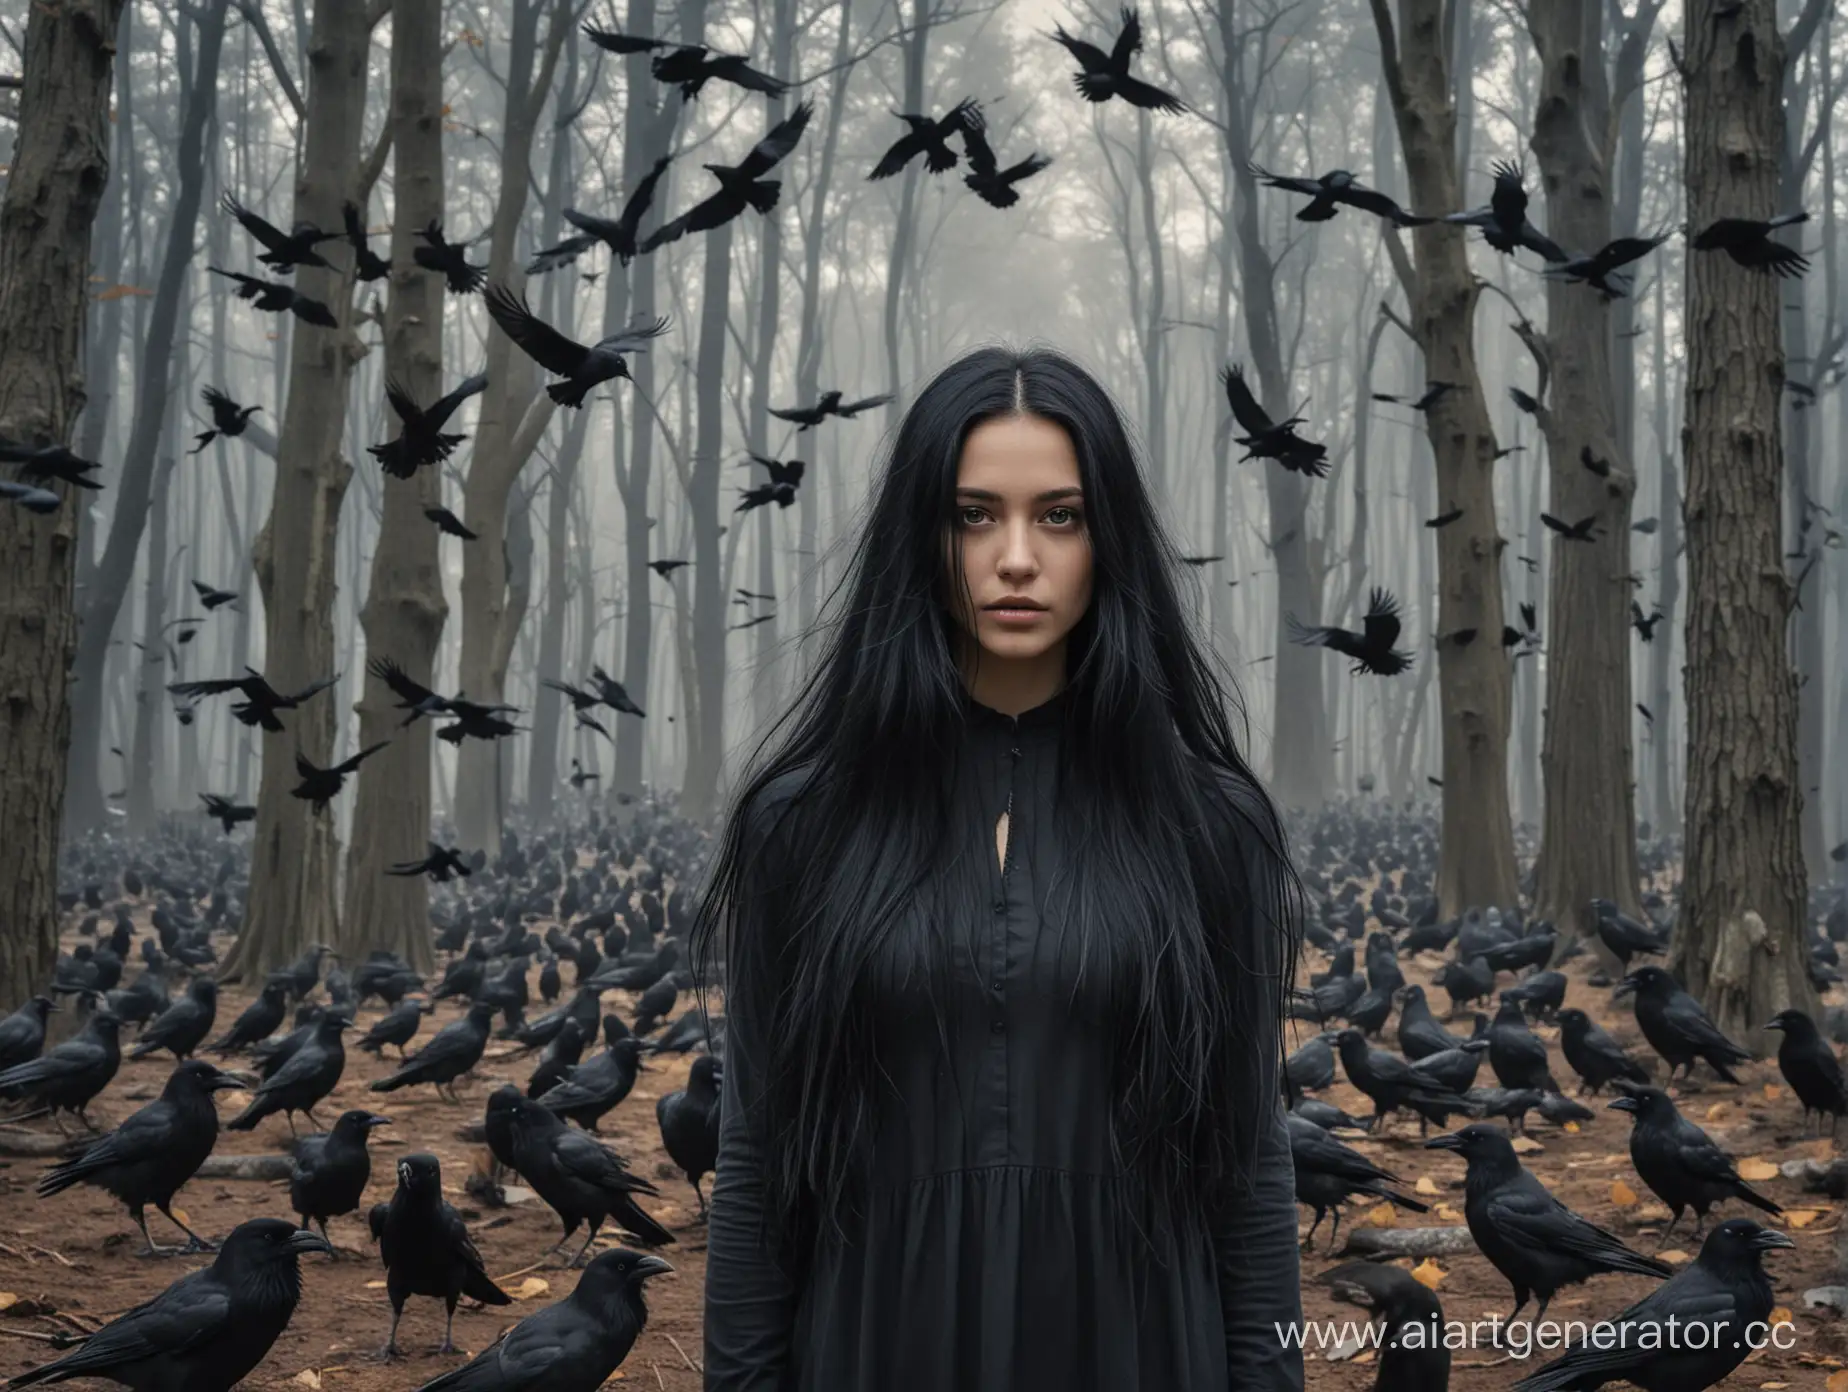 Mysterious-Girl-with-Long-Black-Hair-Surrounded-by-Crows-in-Enchanted-Forest